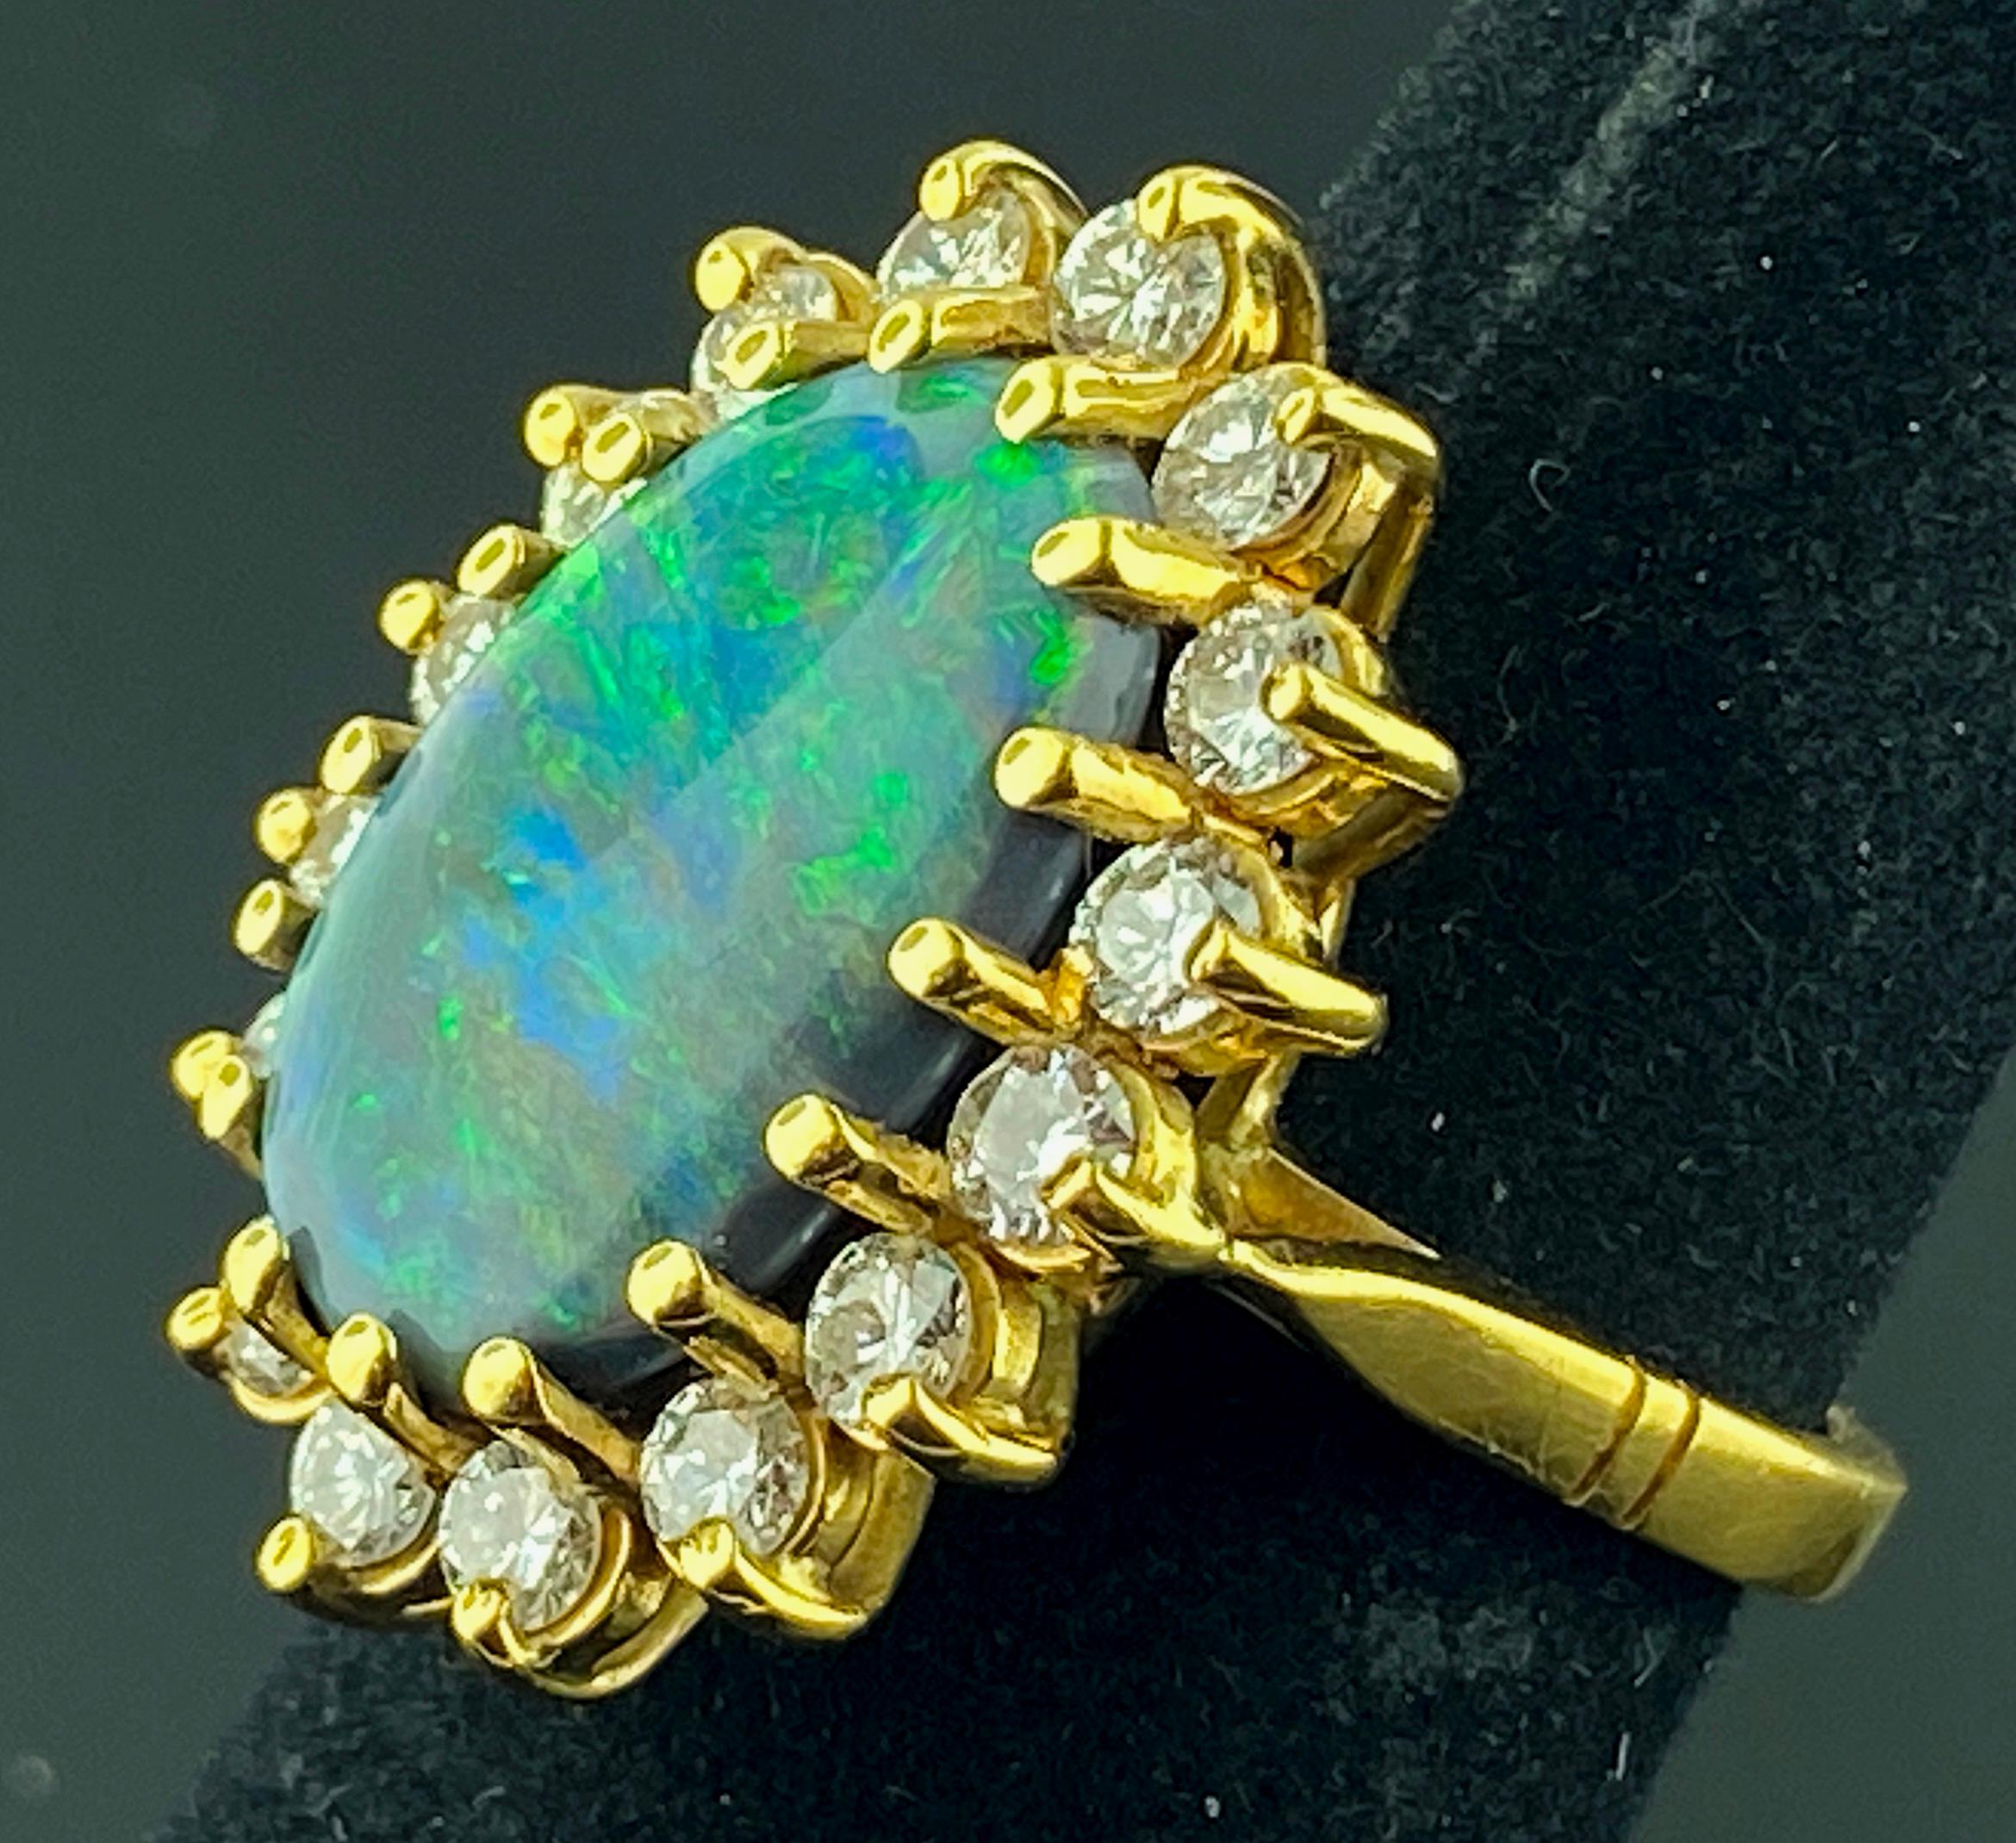 Set in 18 karat yellow gold is a 10 x 16 millimeter Opal surrounded by 17 round brilliant cut diamonds with a total diamond weight of 2.00 carats.  Color is G, Clarity is VS.  Ring size is 7.